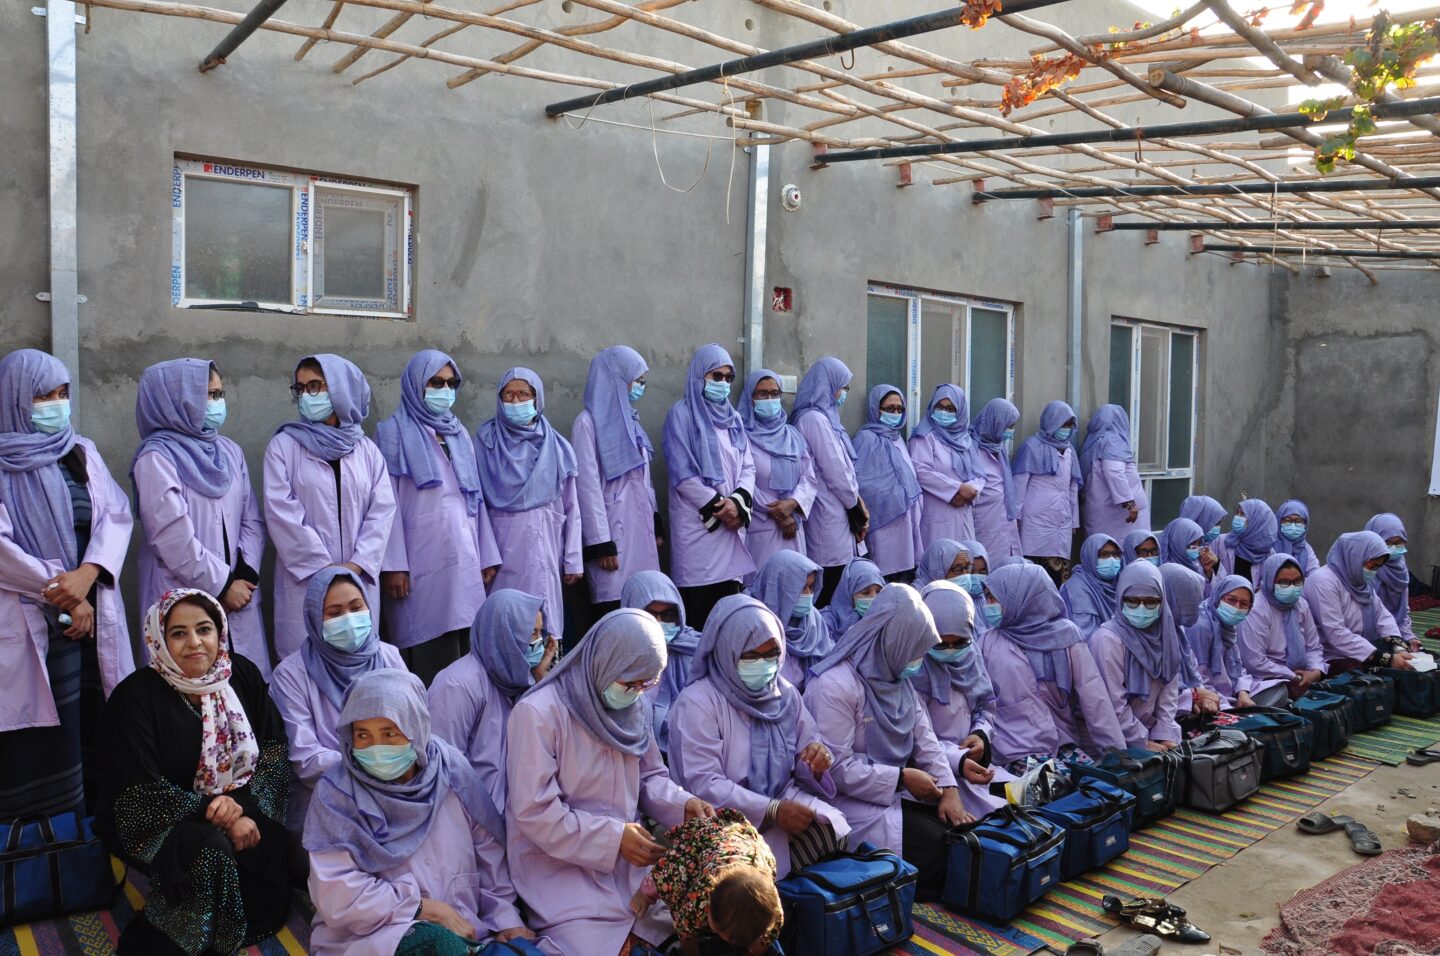 Community Health Services program volunteers in Afghanistan. Participants in project initiated by Label STEP and Turquoise Mountain.